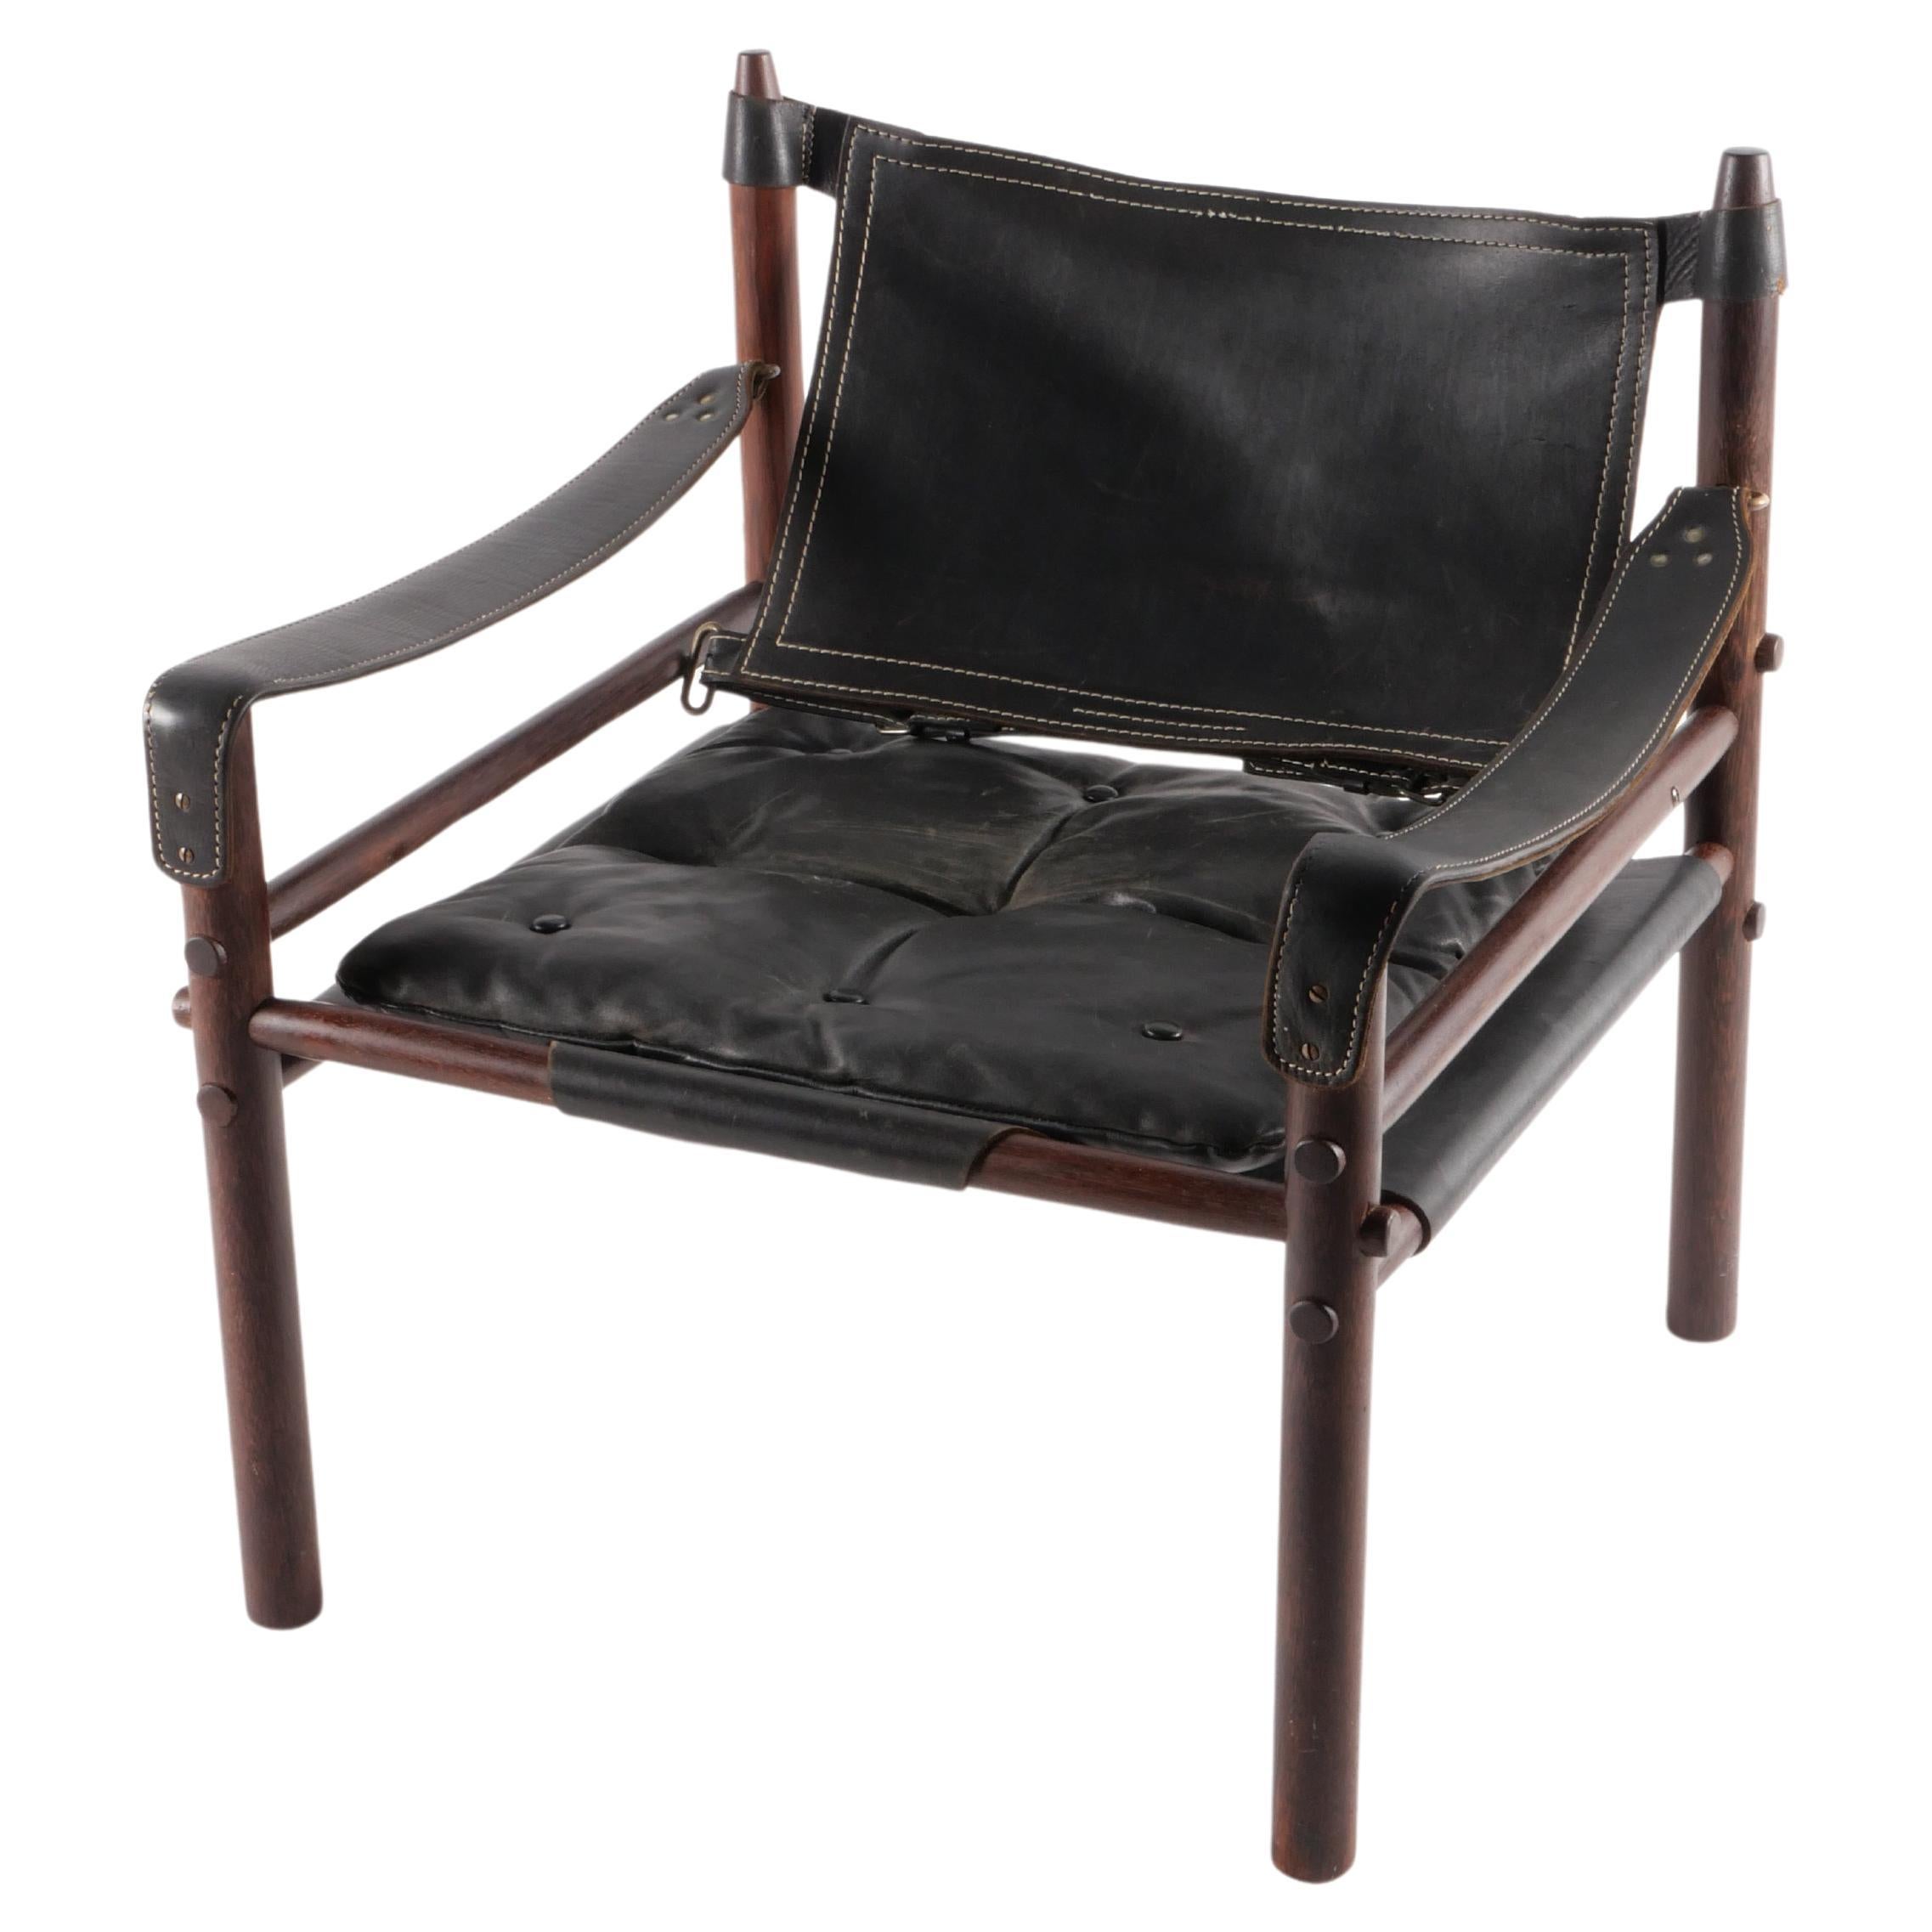 “Sirocco” Safari Chair in Leather by Arne Norell 